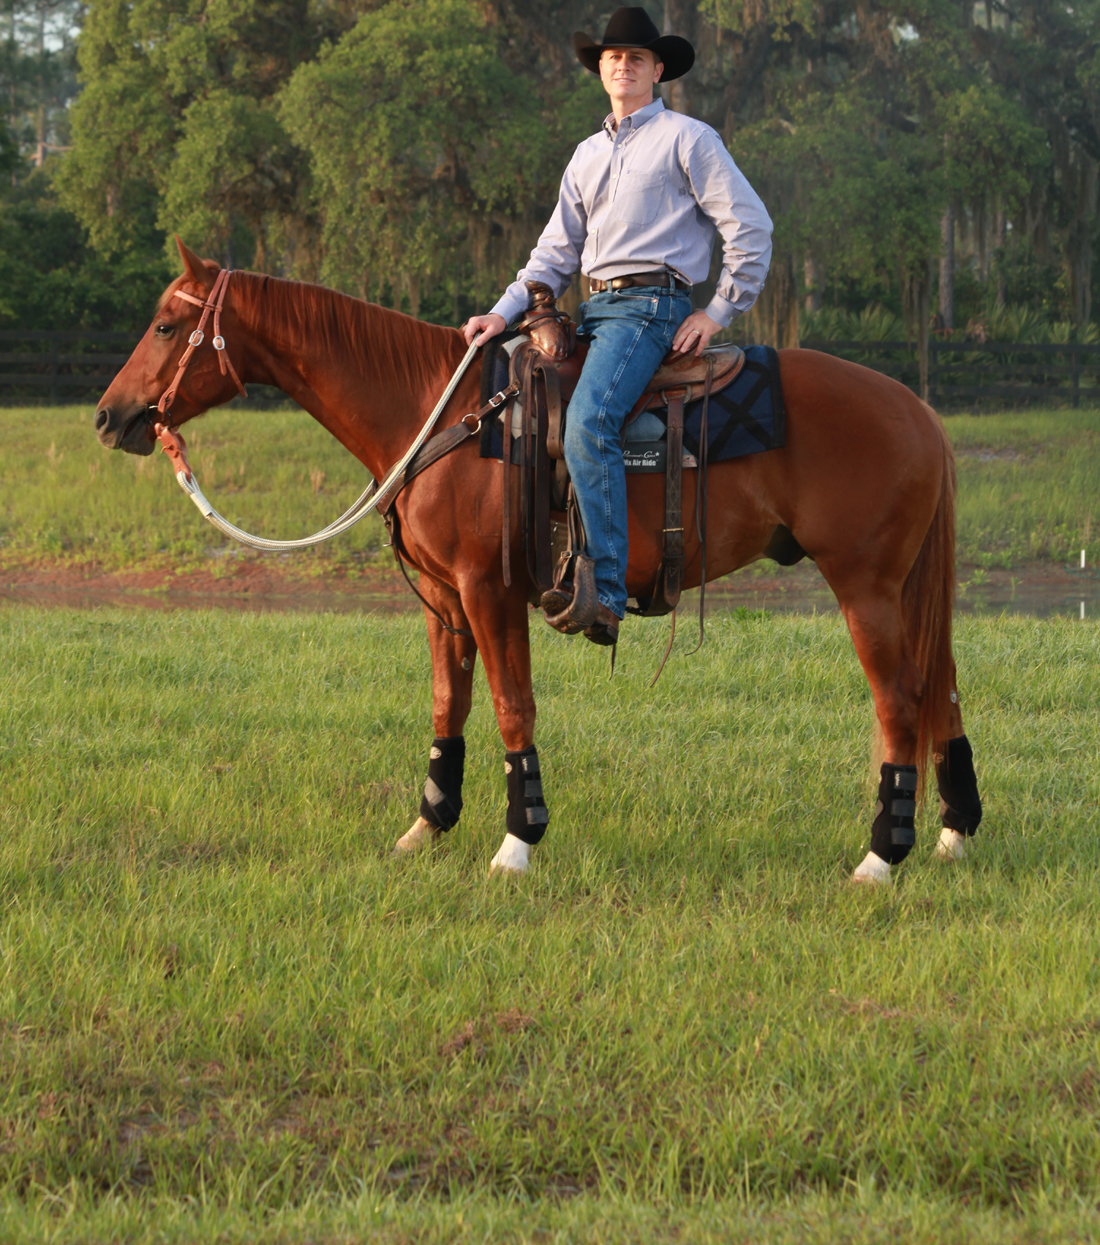 New Smyrna Beach Horse Trainer to participate in International Horse Competition October 16, 2013-NEW SMYRNA BEACH, FLORIDA- For eight of the world’s leading horse trainers, the road to success leads to Lexington, Kentucky. During March 13-16 of next year, locals and visitors alike will gather in Alltech Arena, at the Kentucky Horse Park to cheer on their favorite horseman.